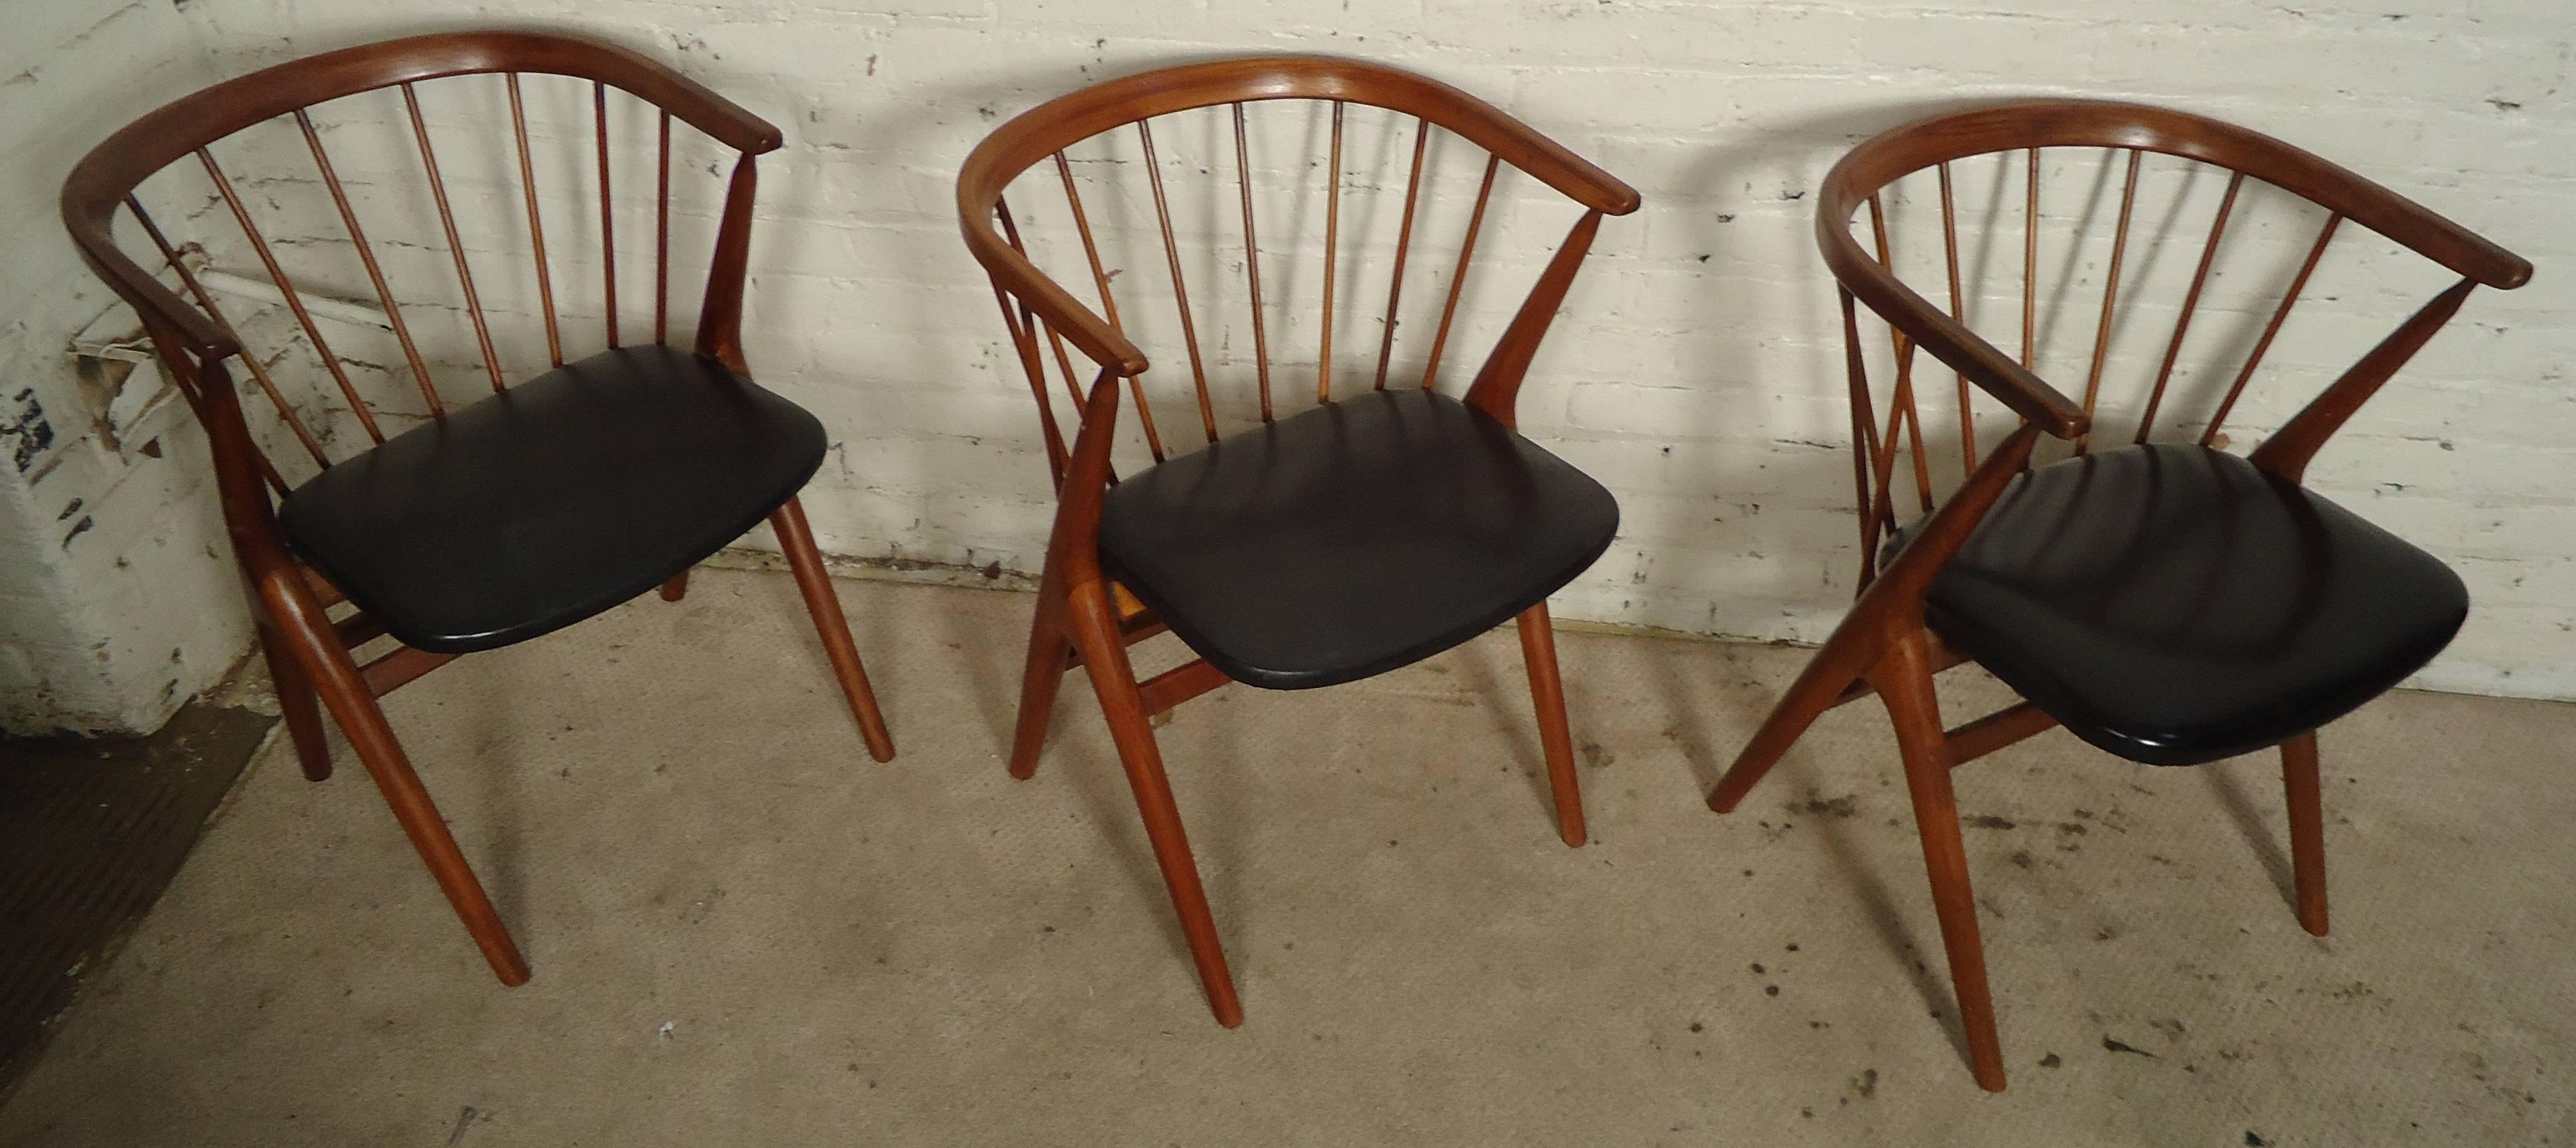 Set of Danish vintage-modern windsor back chairs, features beautiful sculpted teak frames and vinyl seats, by Sibast Mobler.

(Price is per chair, One available)

Please confirm item location NY or NJ with dealer.